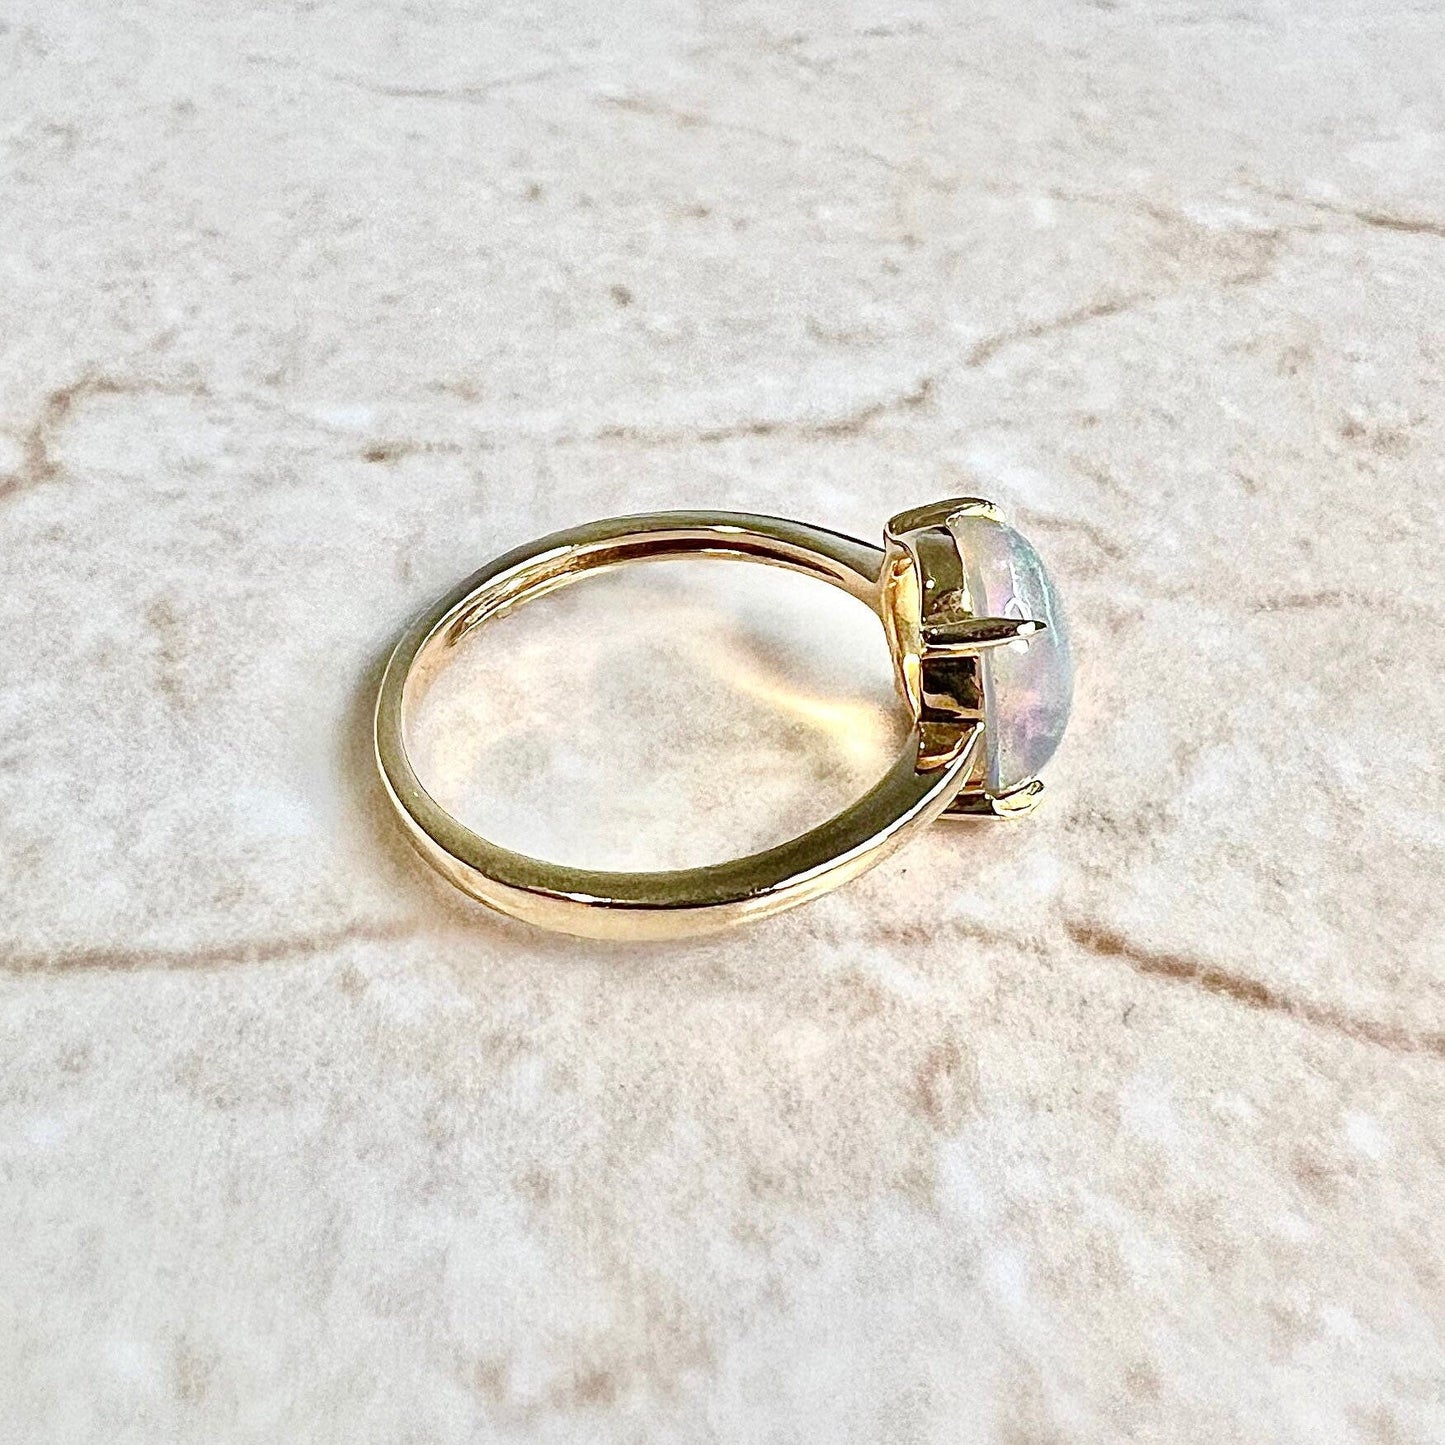 10K Natural Opal Solitaire Ring - 10 Karat Yellow Gold Opal Ring - October Birthstone - Birthday Gift - Best Gifts For Her - Cocktail Ring